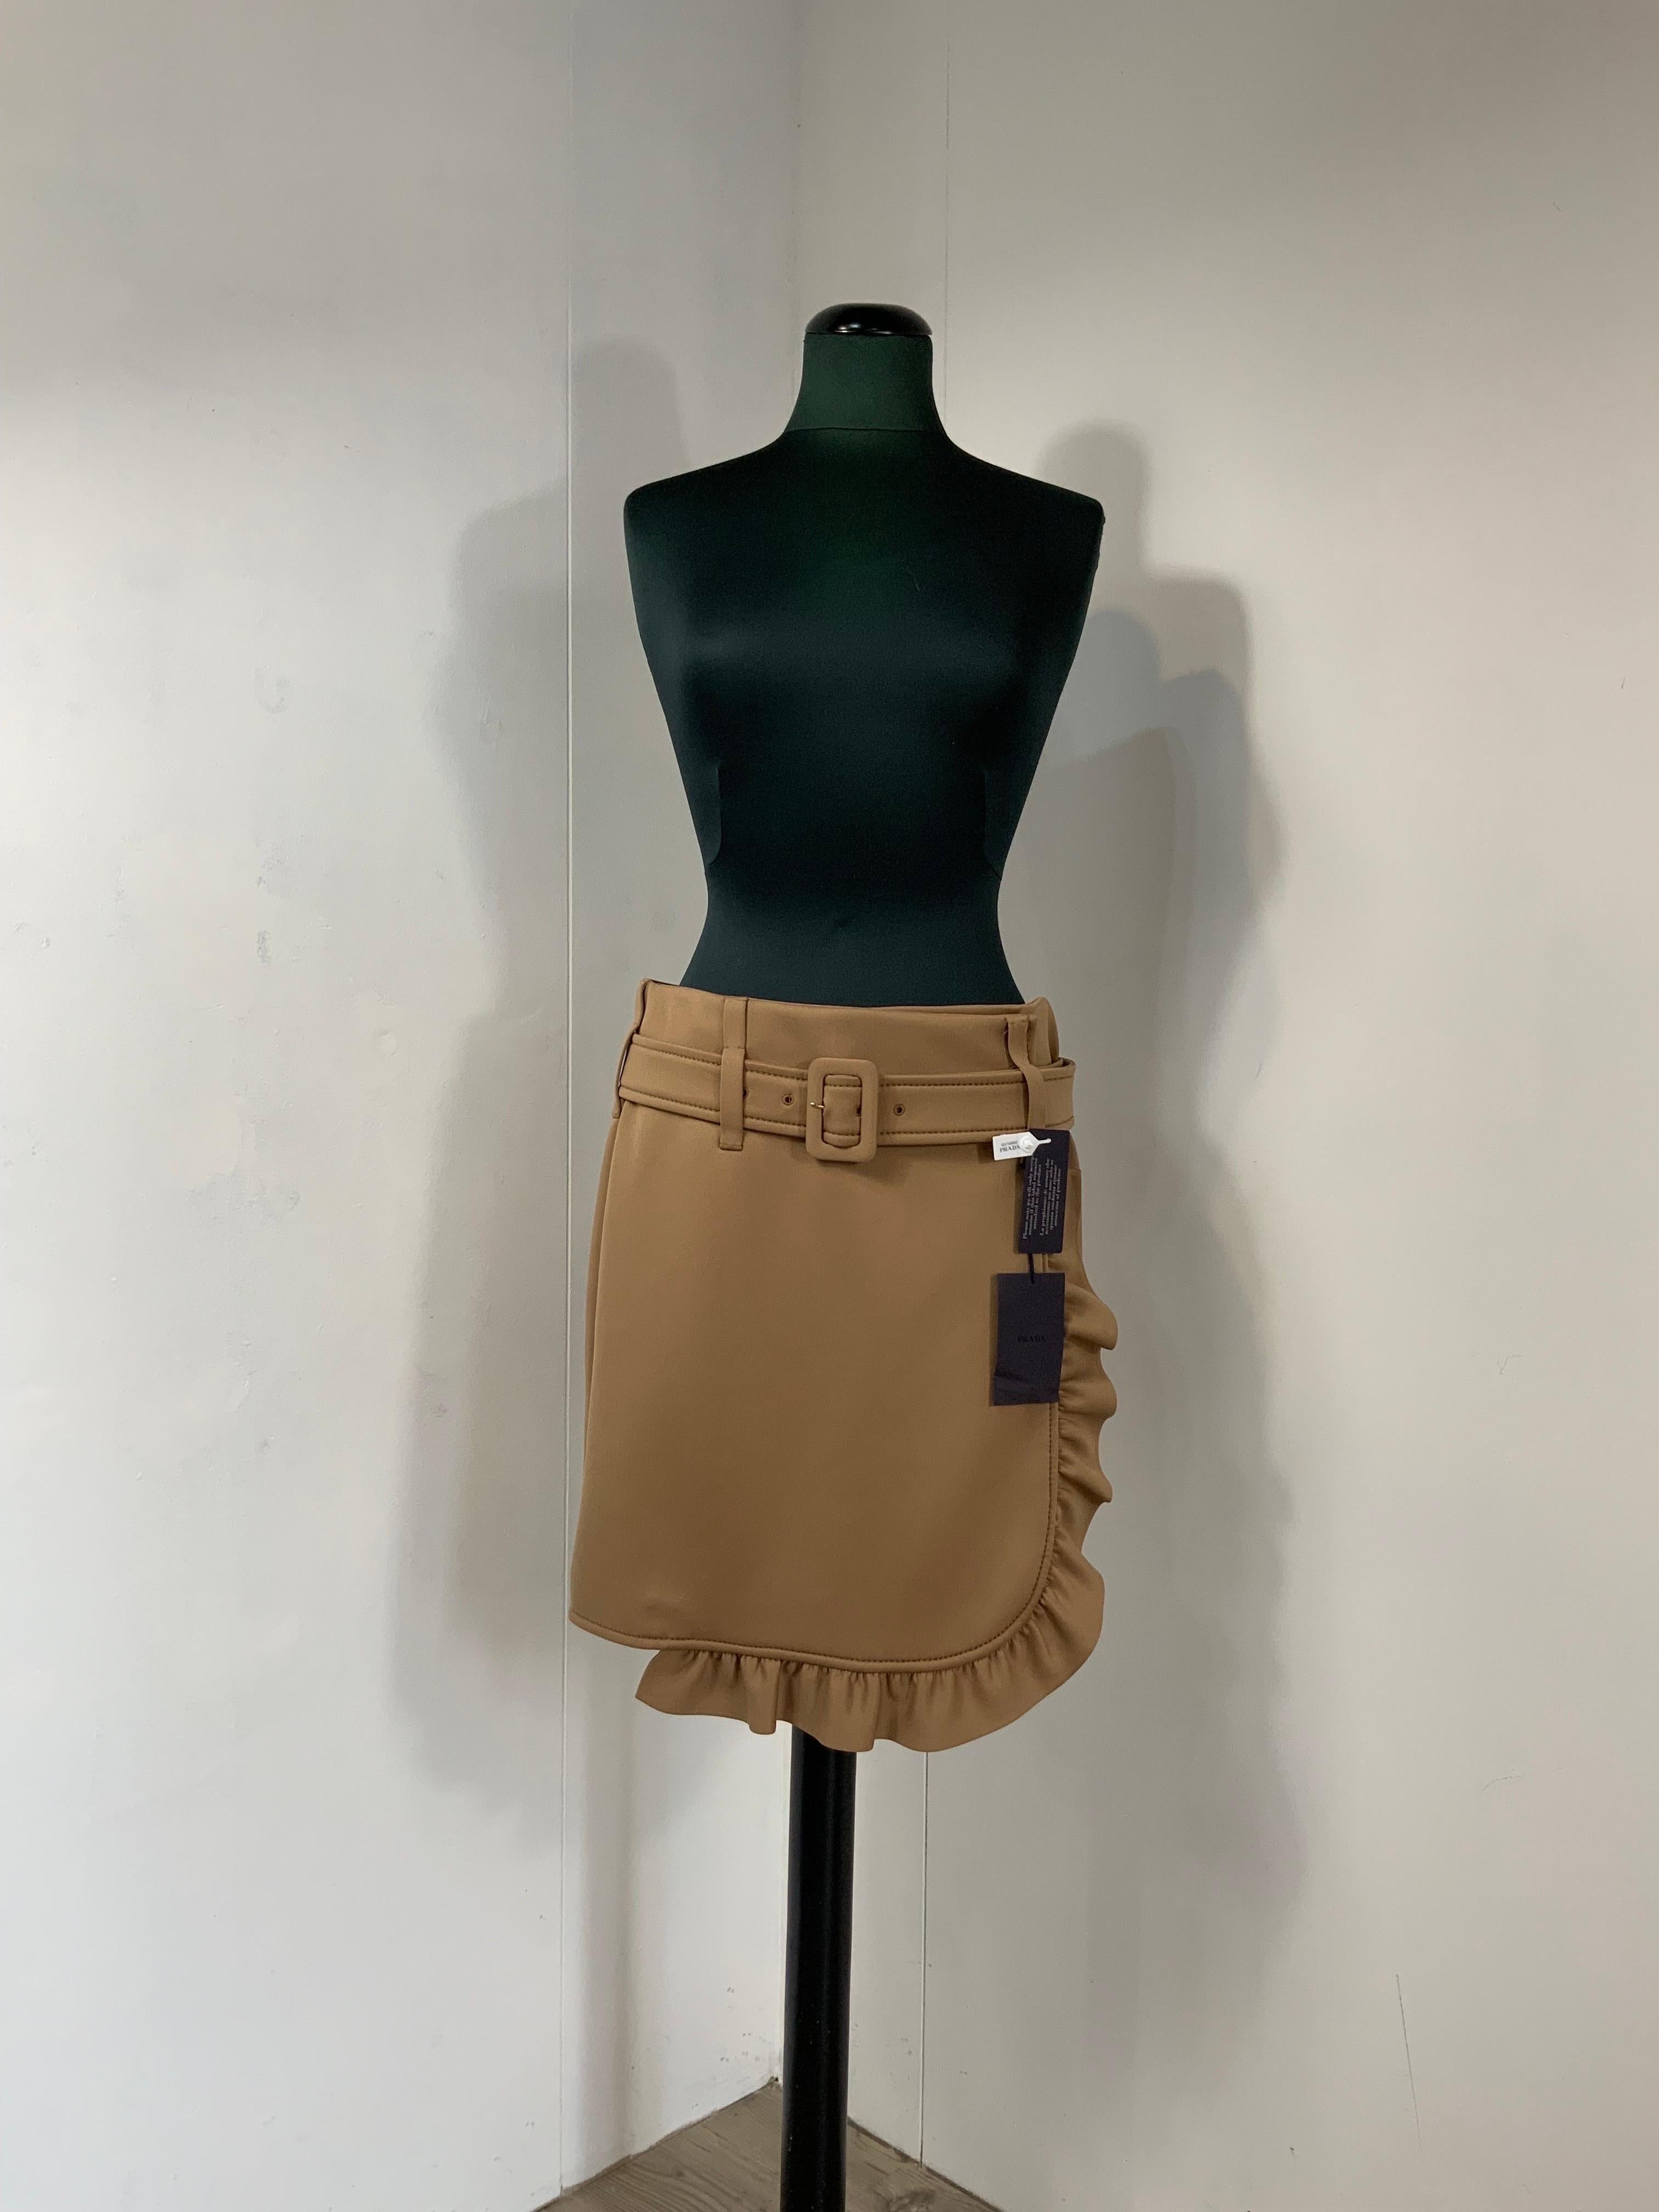 PRADA SKIRT
Fall 2018 Ready to wear.
Made of polyester and elastane. Camel color.
Italian size 40. Wallet closure.
Waist 42 cm
Length 50 cm
New with tag, never worn.